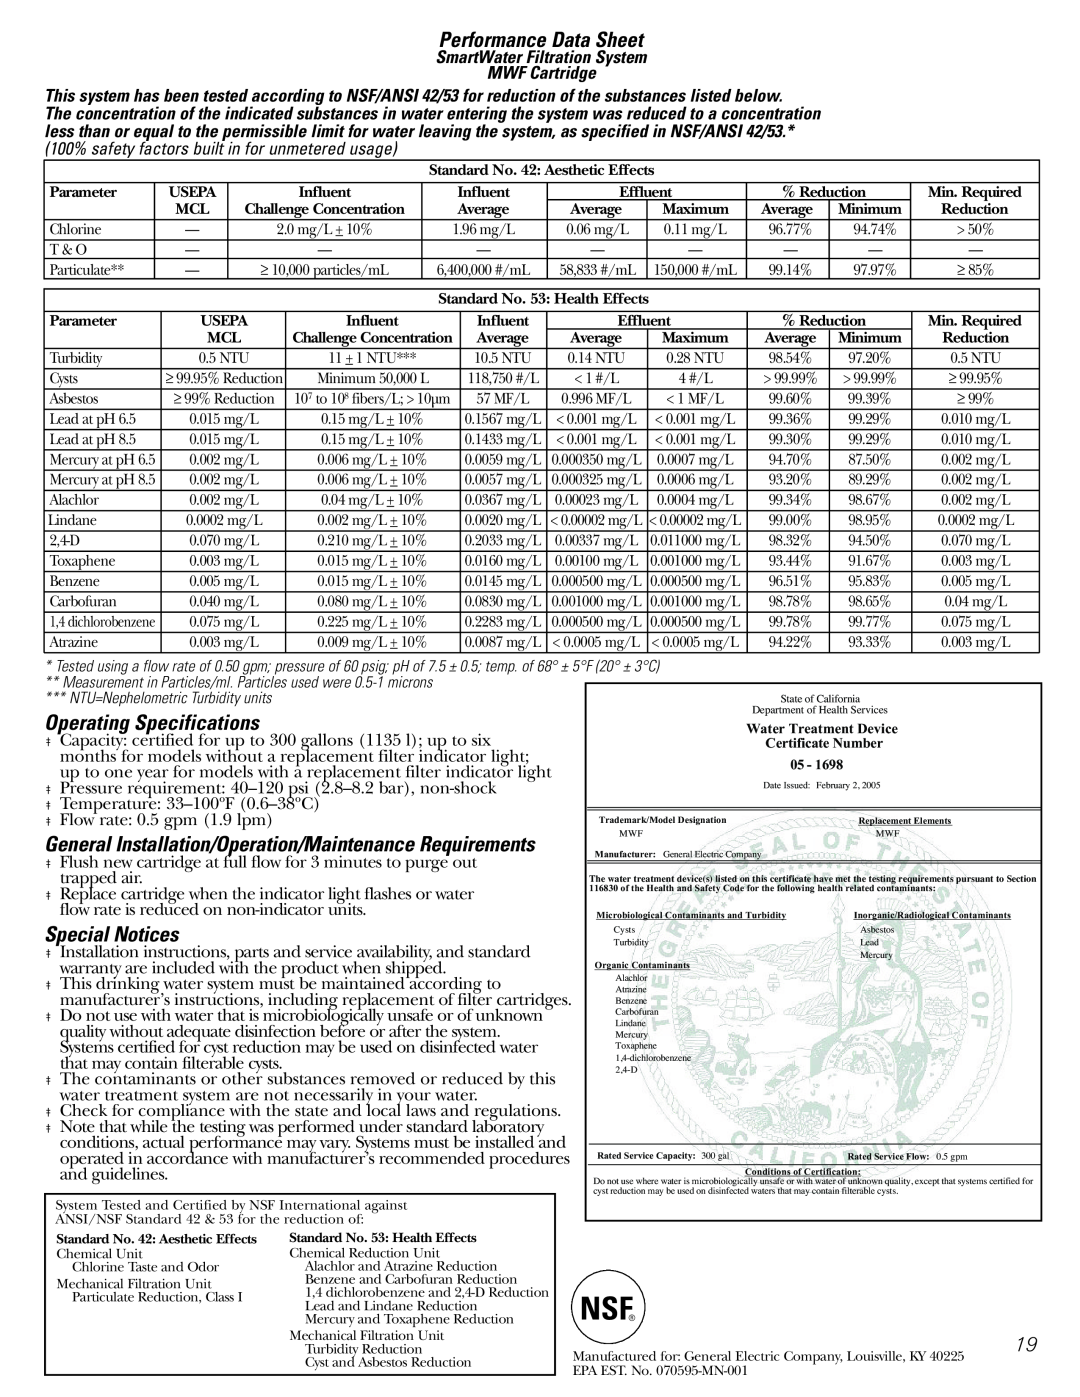 GE GSF25IGZWW manual Performance Data Sheet, Operating Specifications, Special Notices 